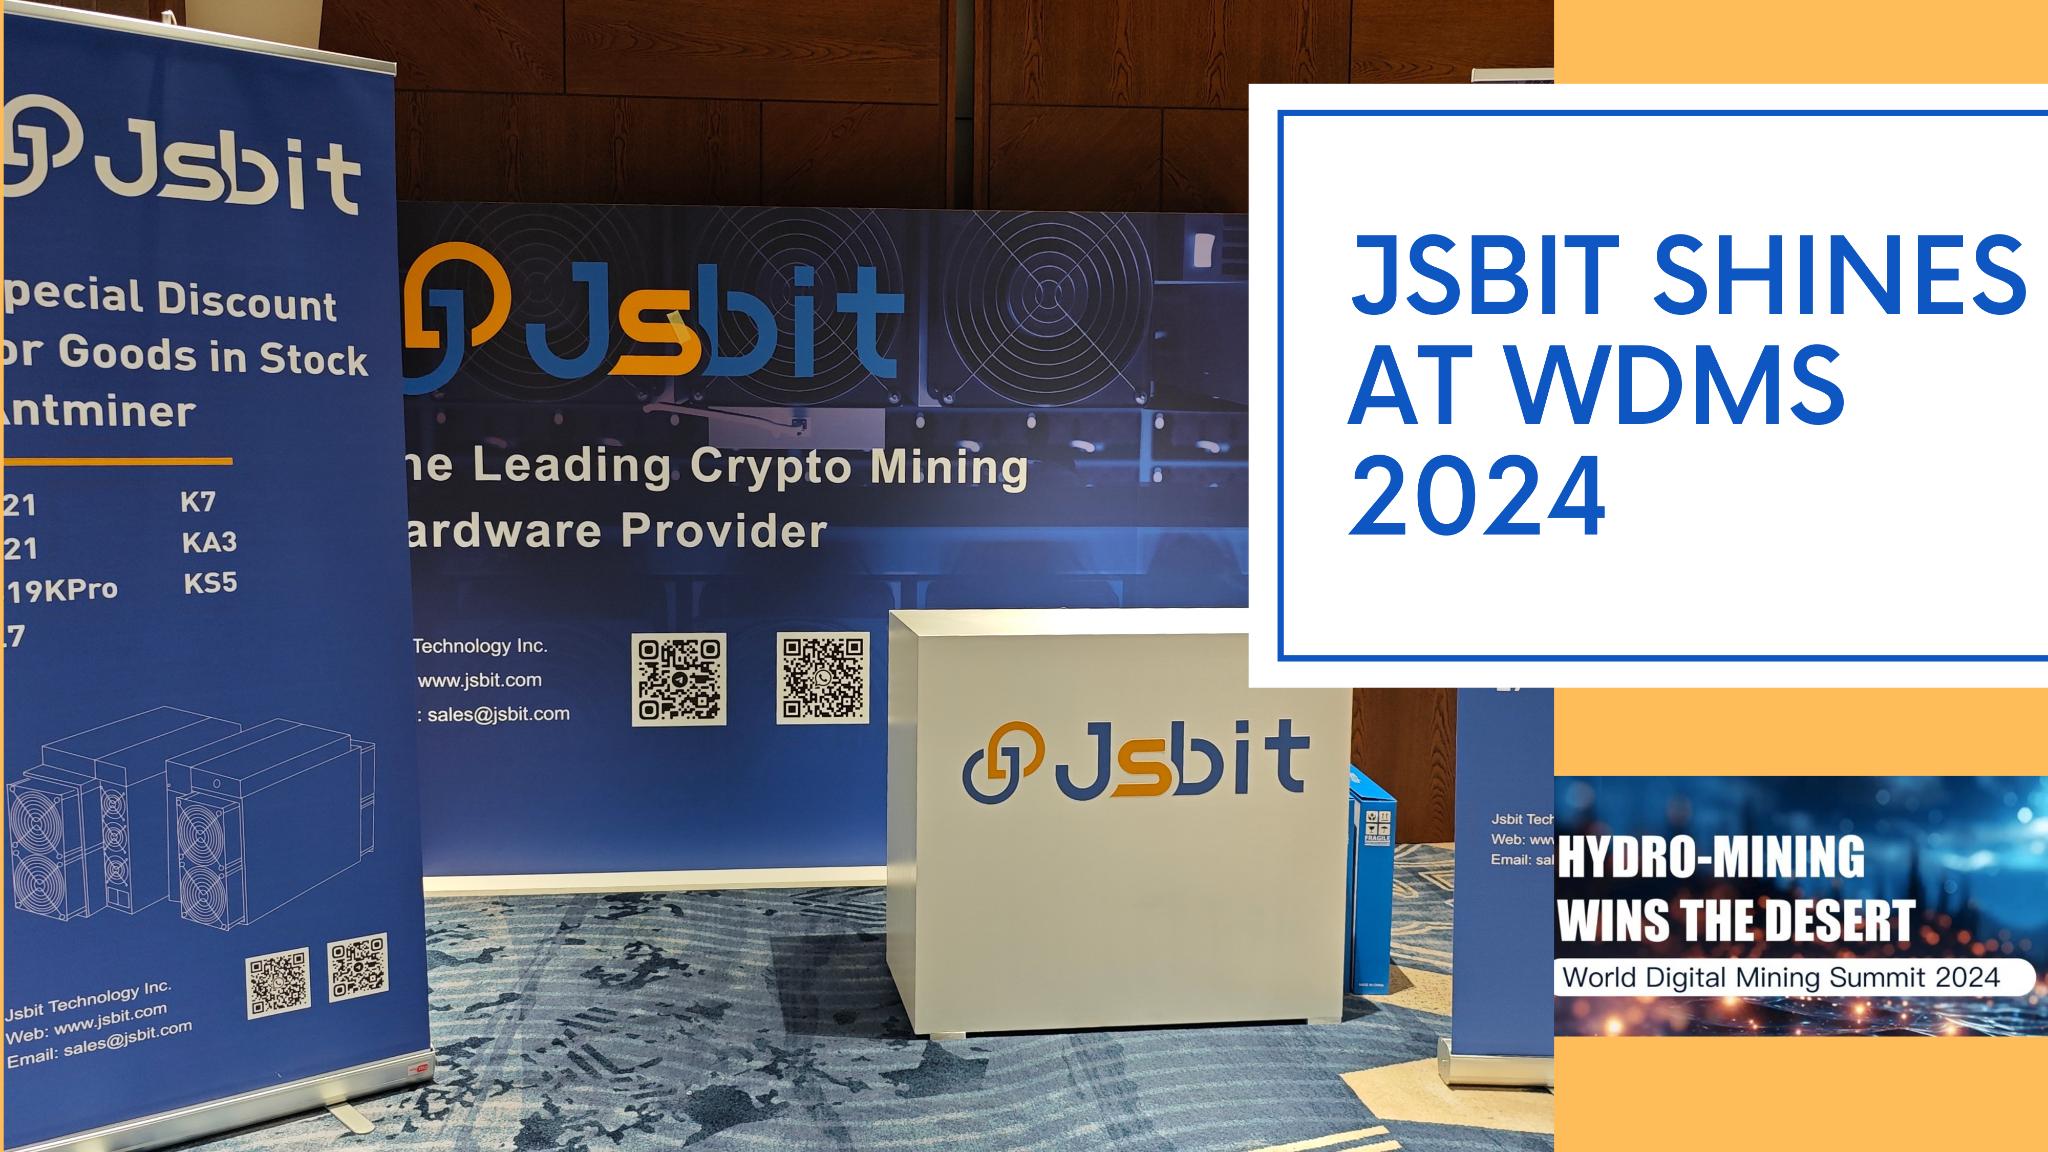 JSBIT Shines at WDMS 2024 Pioneering the Future of Mining Trends News. image